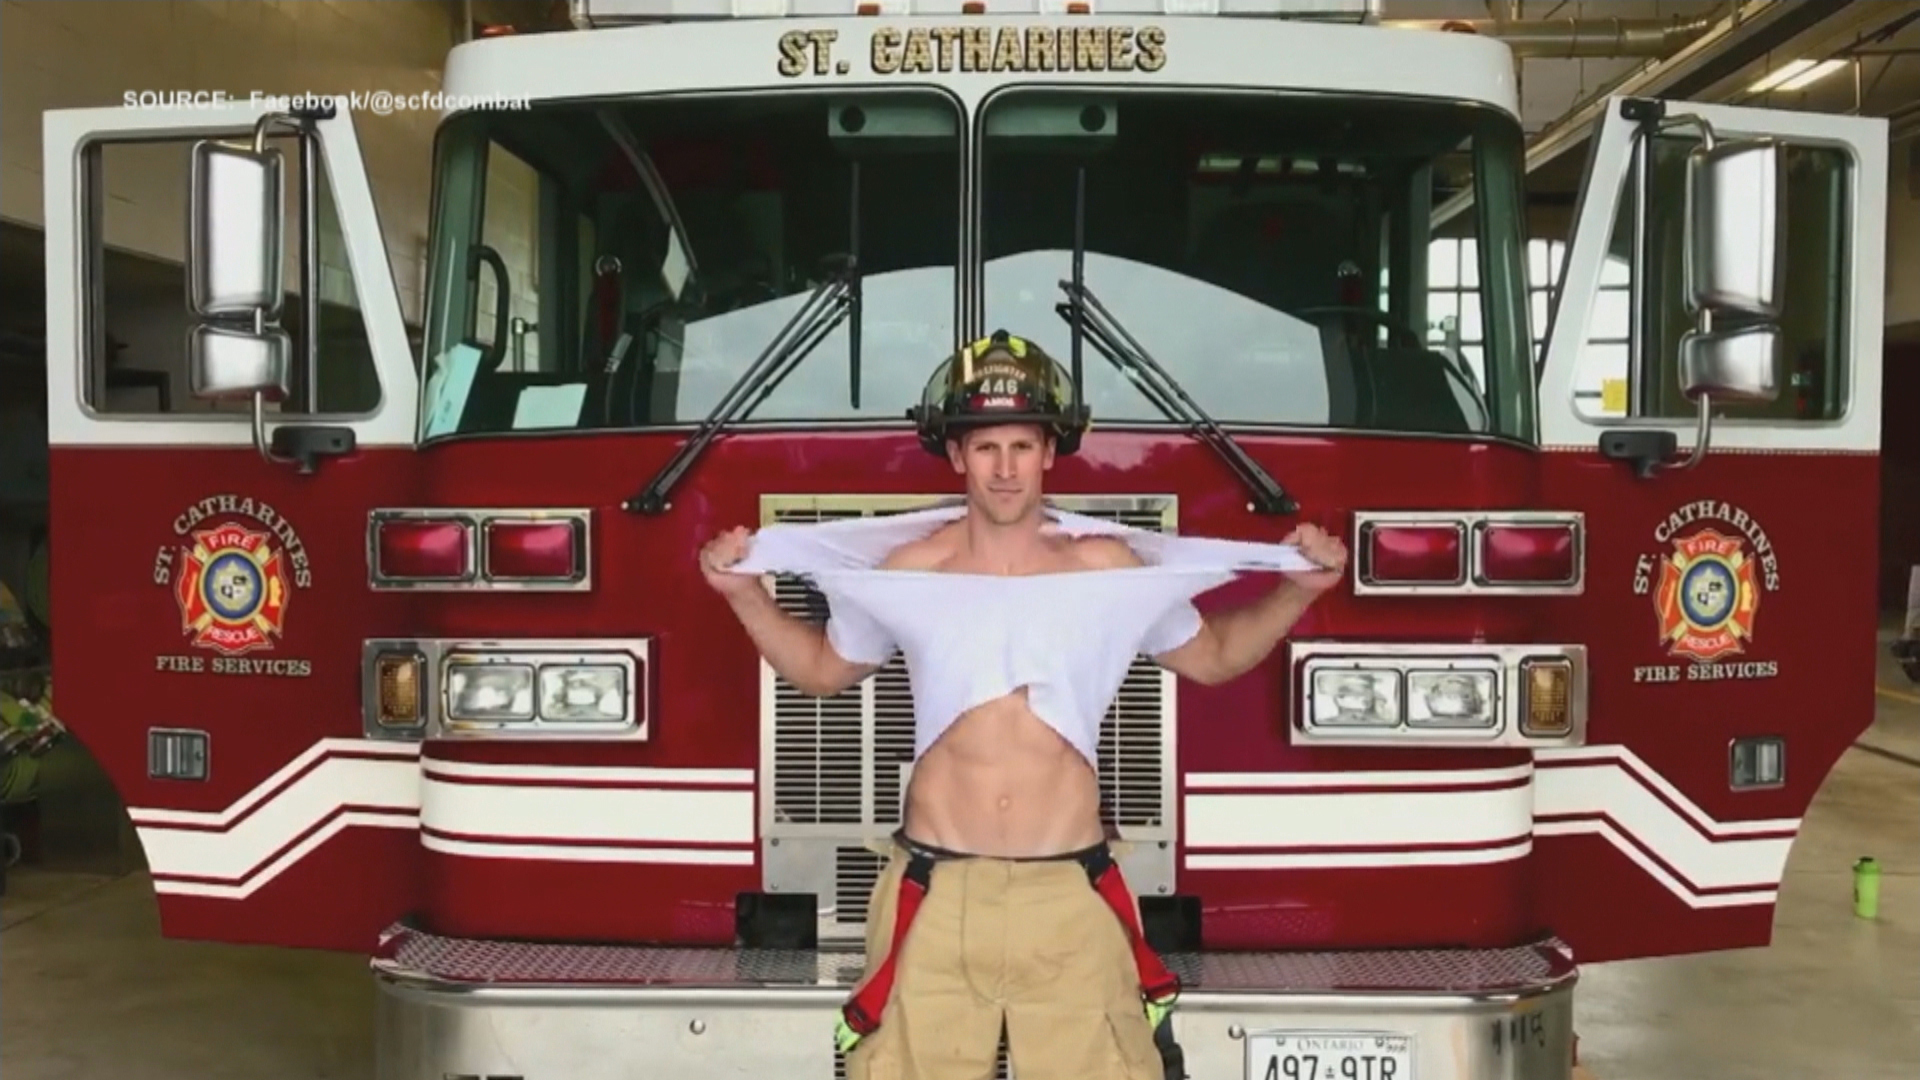 Firefighters in St. Catharines, Ont. have been told their calendar is